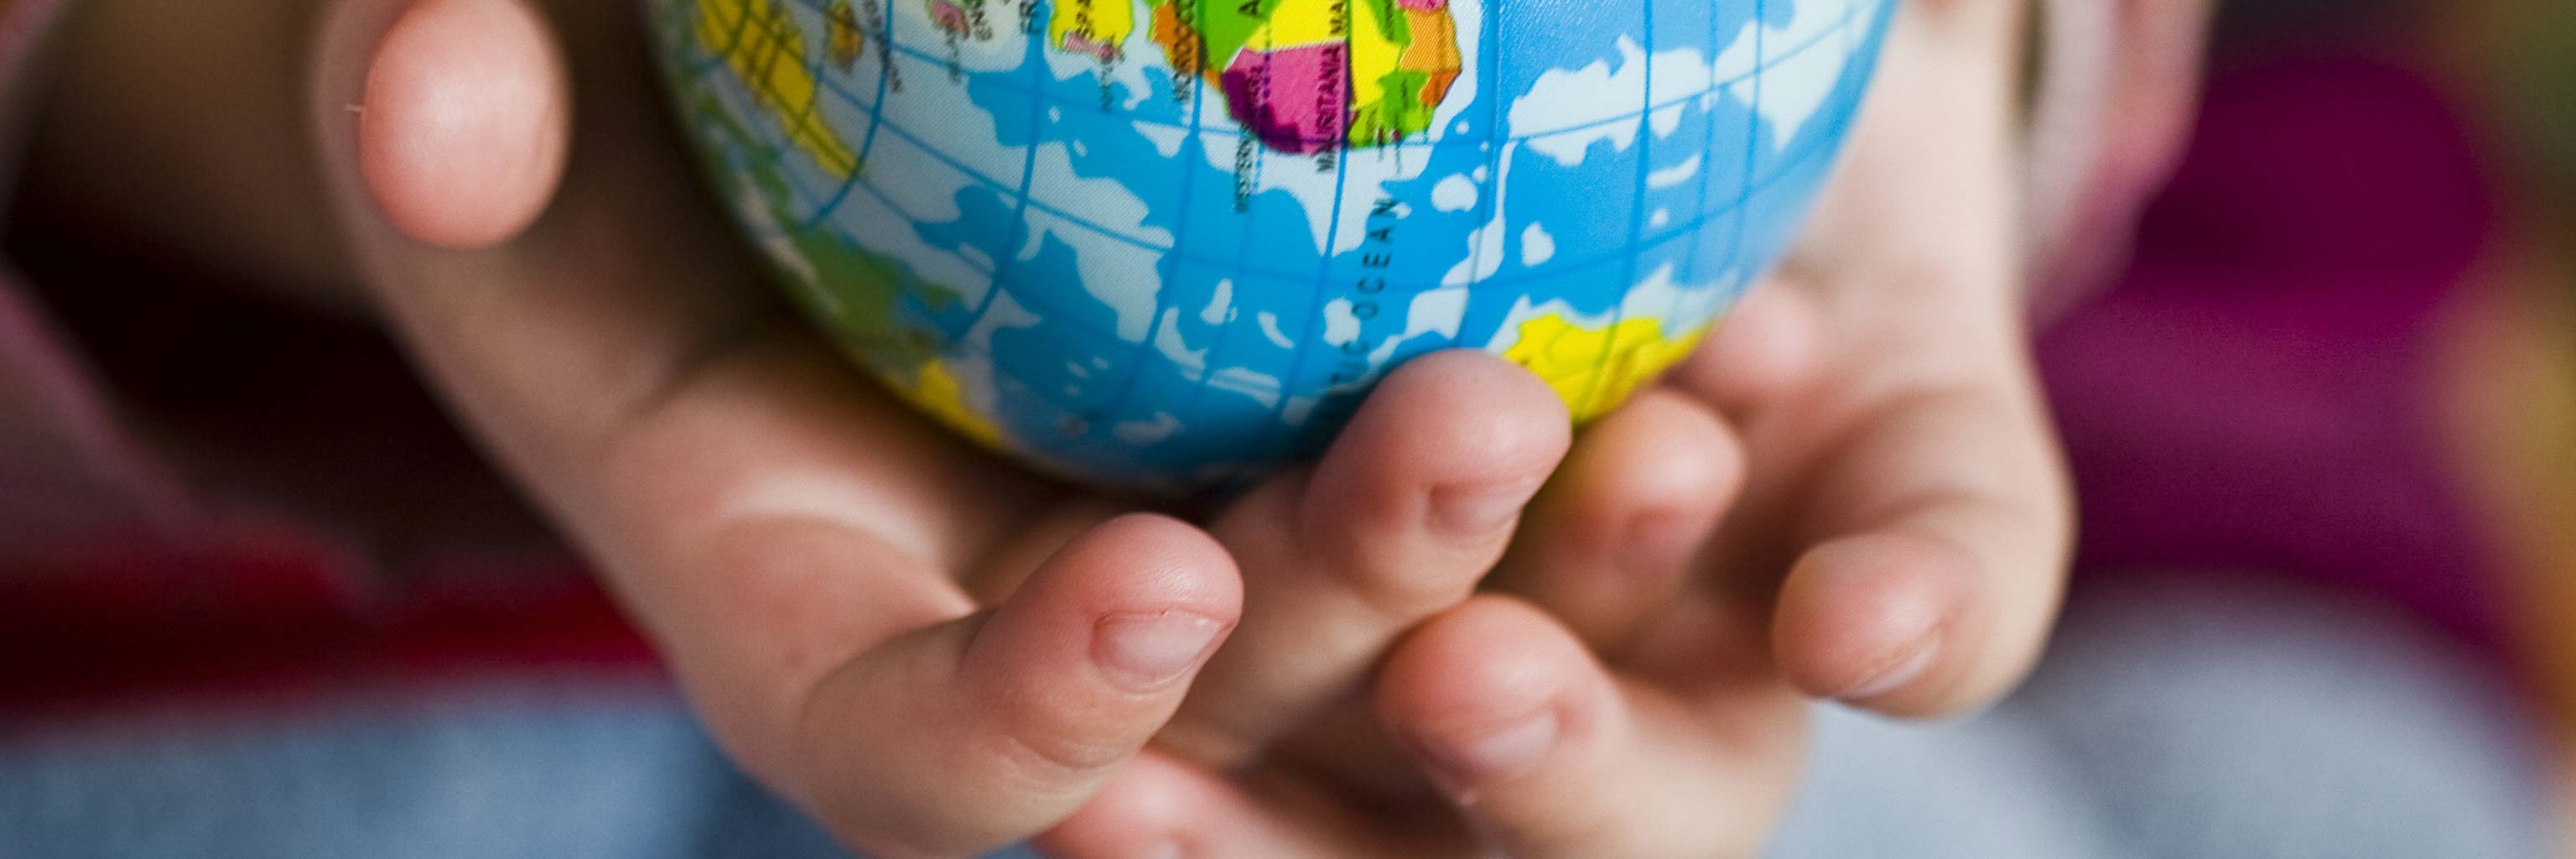 A pair of hands holding a small model of a globe